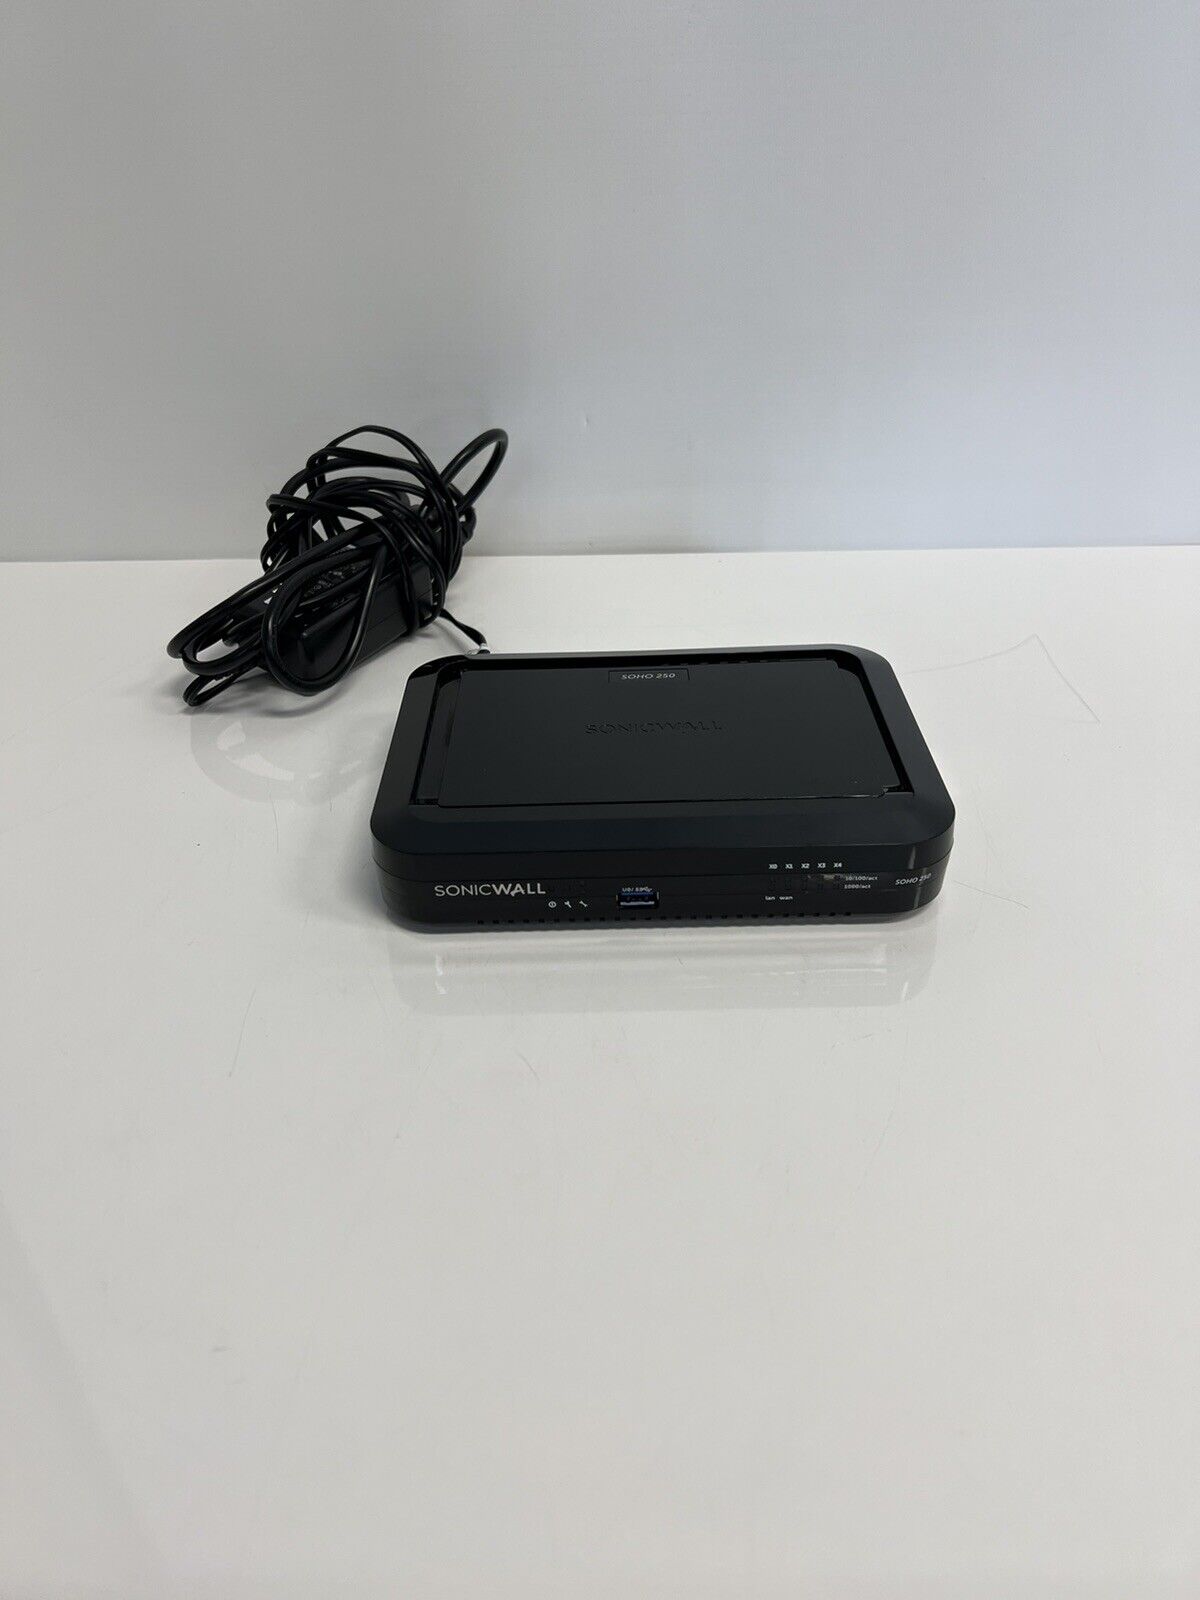 Dell Sonicwall SOHO 250 APL41-0D6 Firewall Network Security With ADAPTER